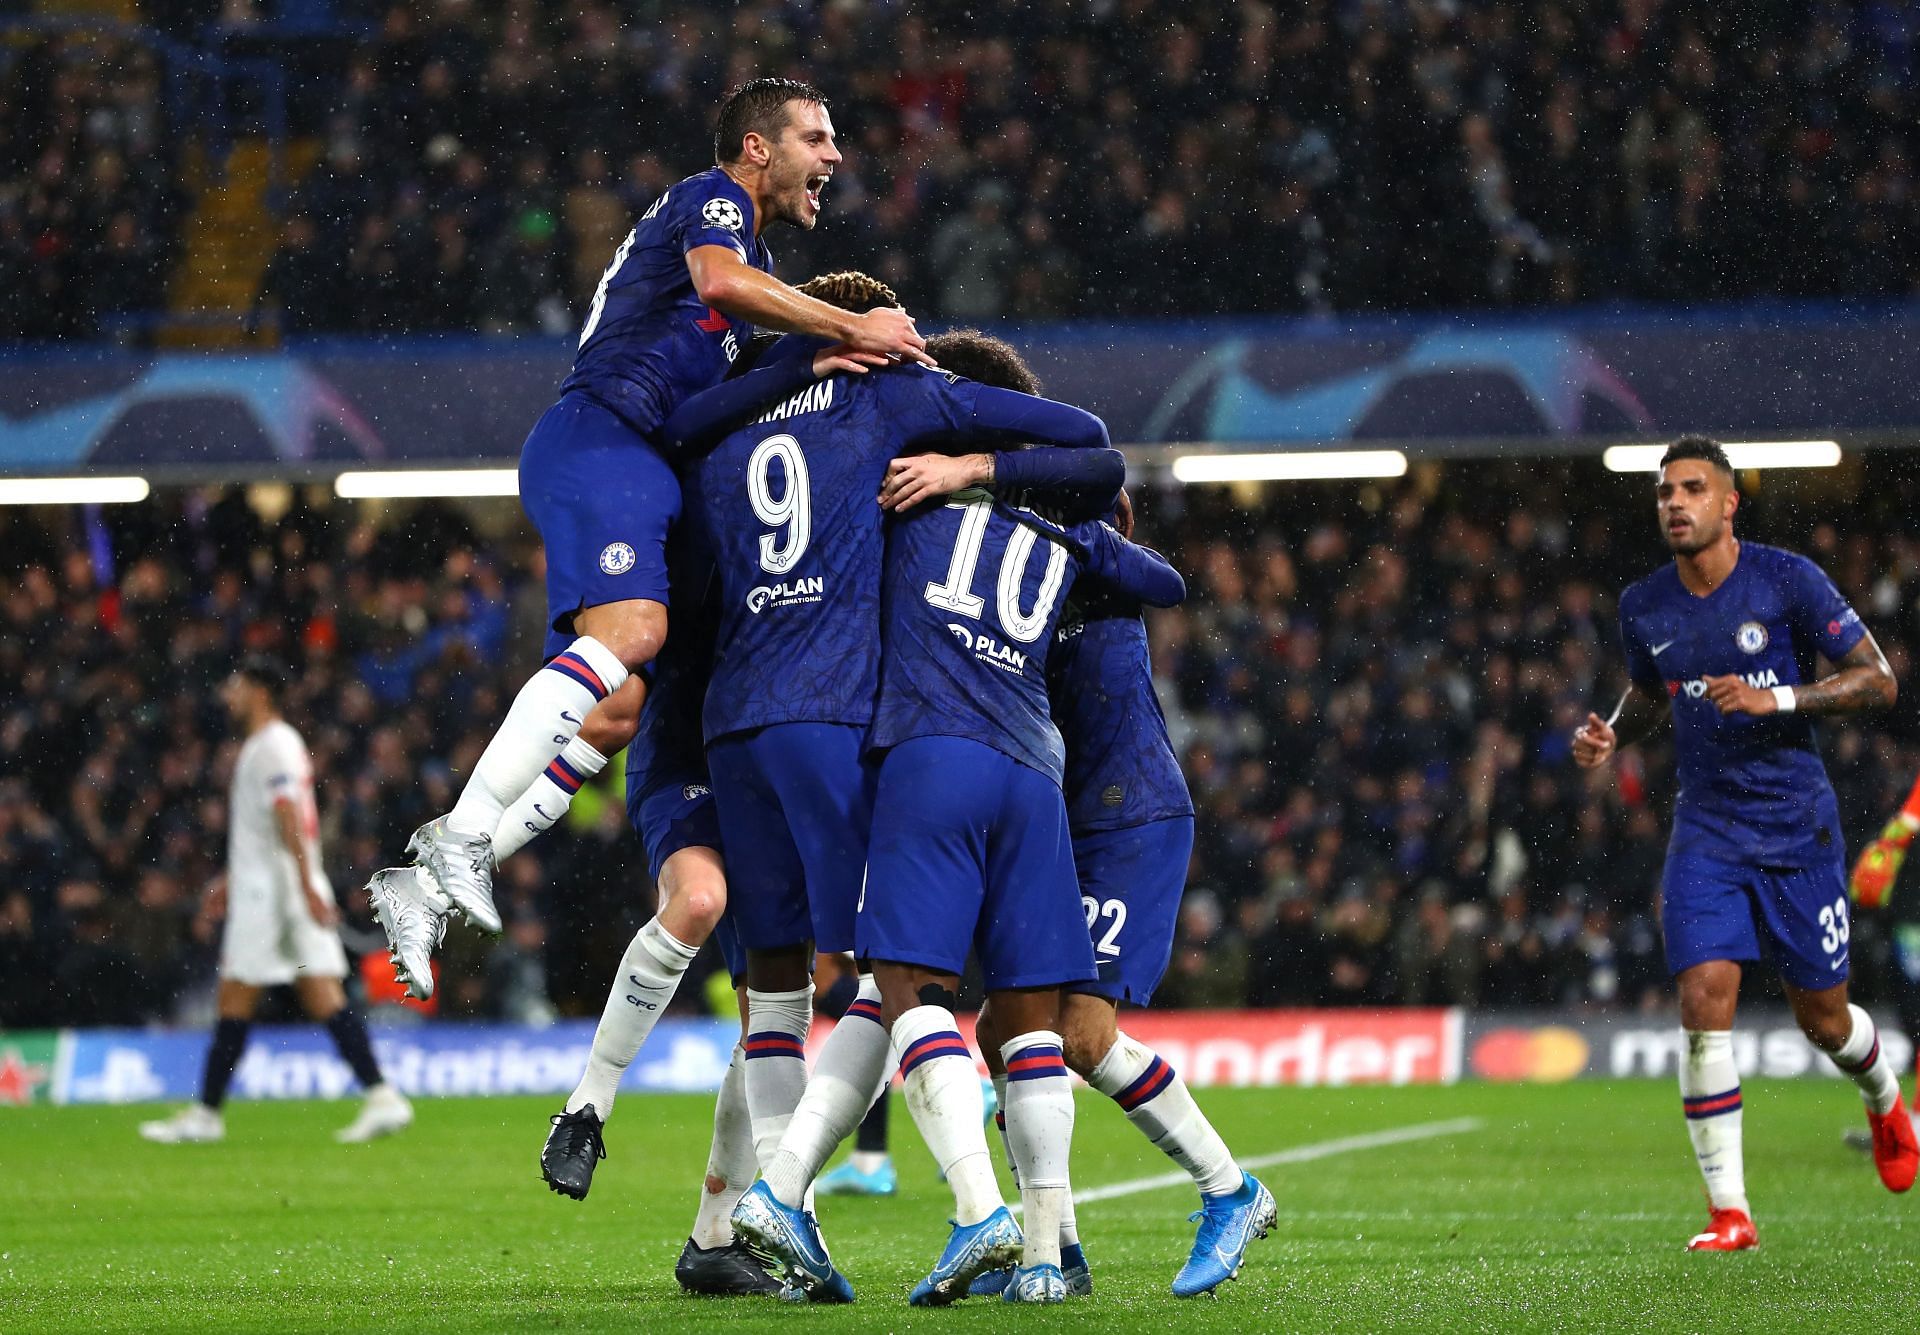 Chelsea play host to Lille on Tuesday